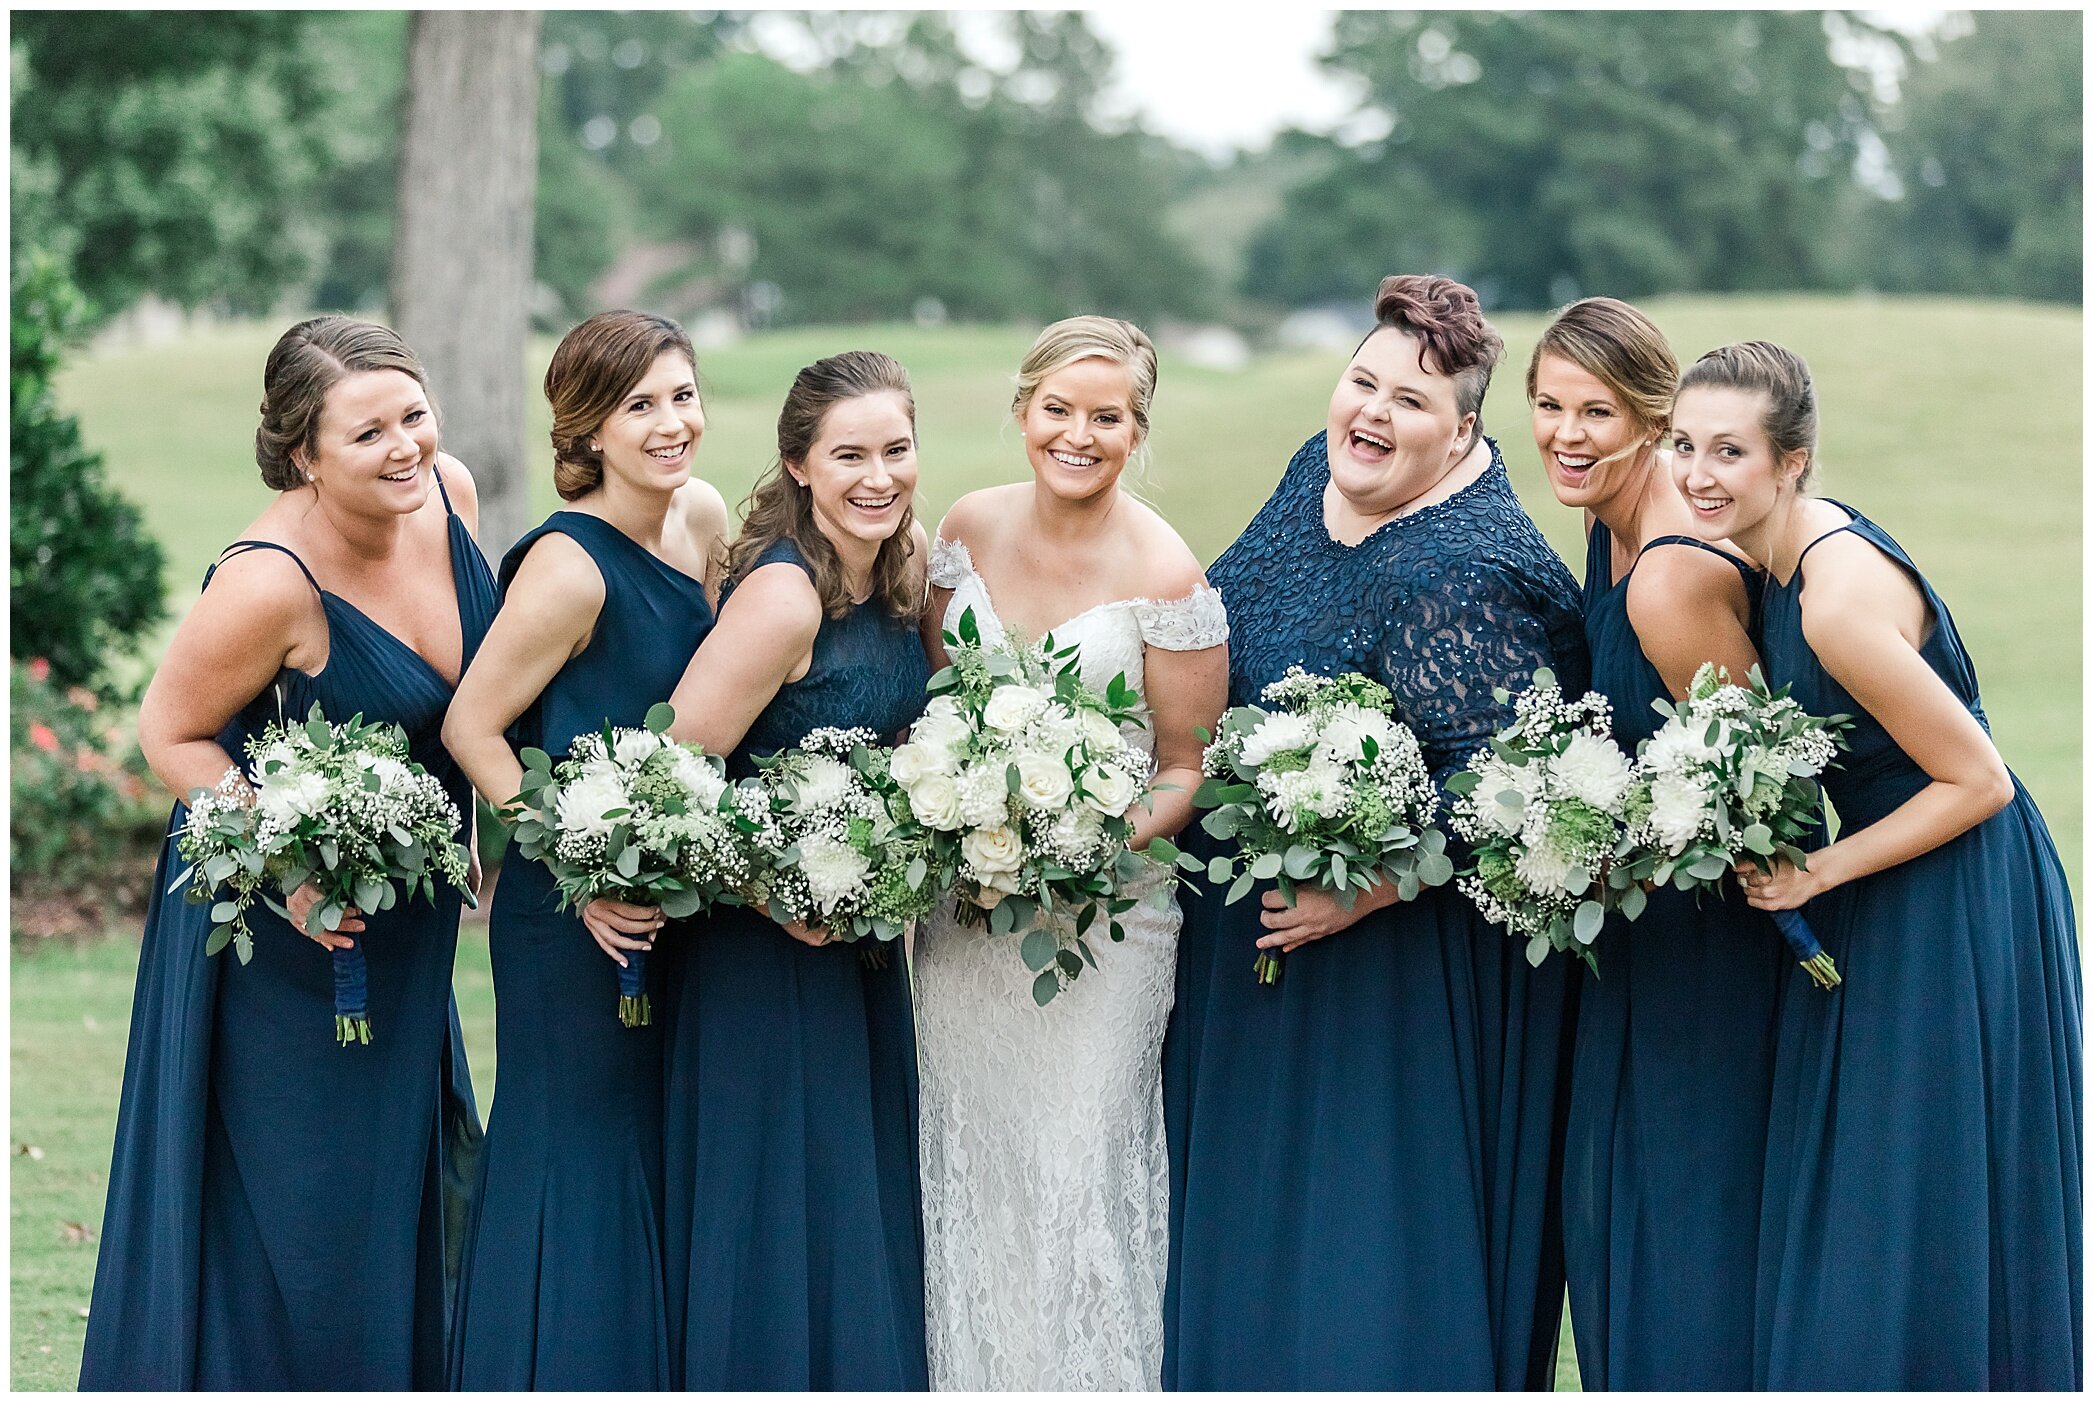 bridesmaids in navy gowns hold bouquets of white flowers